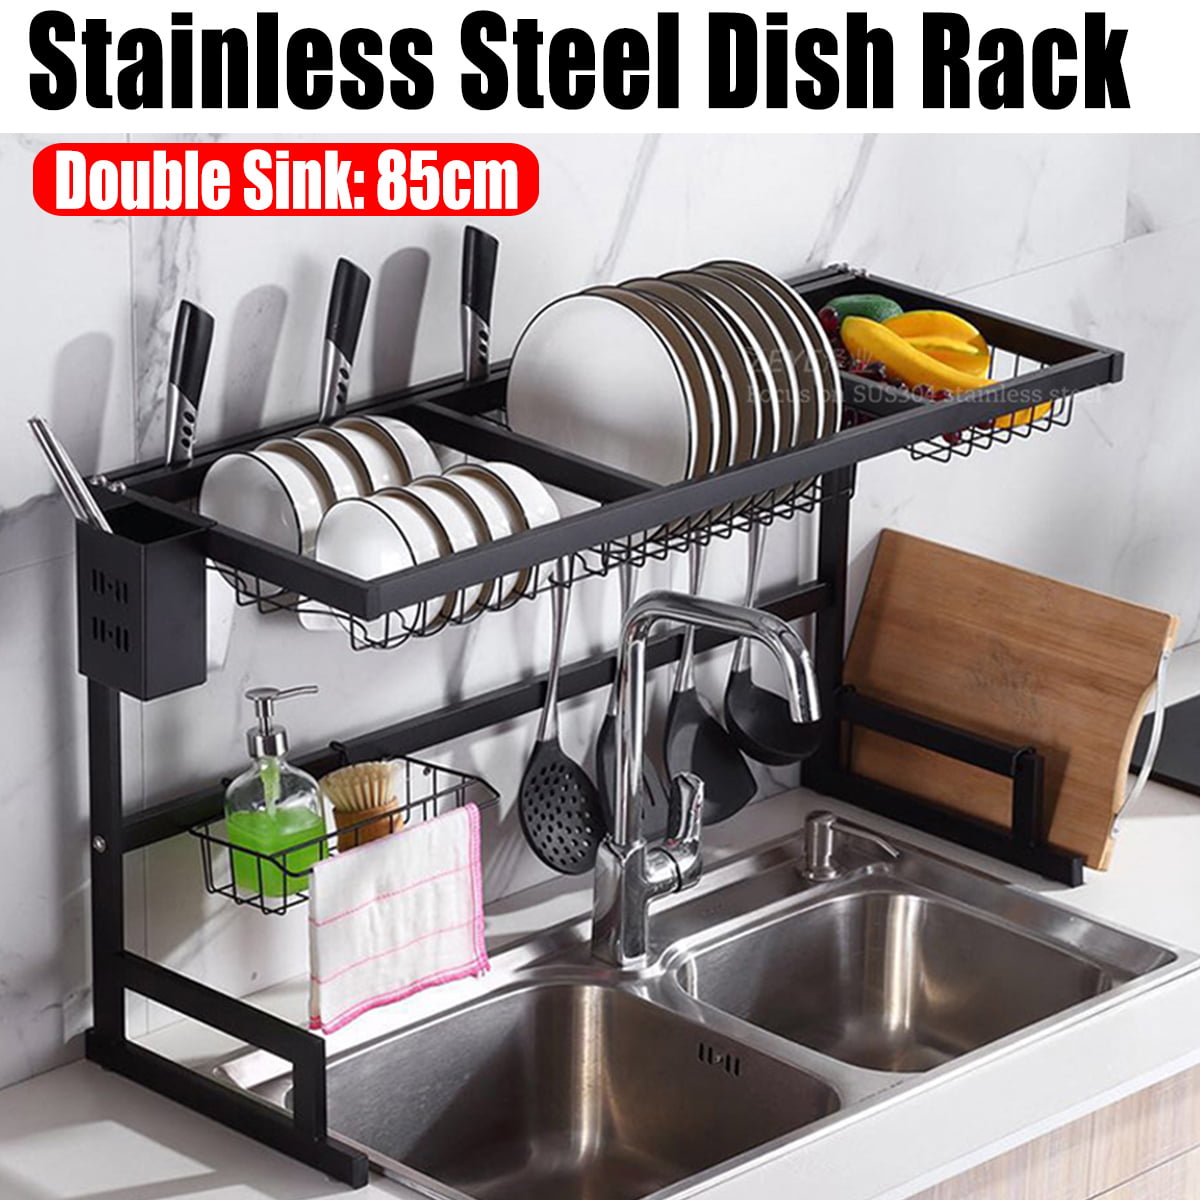 Details about   Over The Sink 2 Layer Dish Cup Steel Drainer Shelf Kitchen Cutlery Holder rack 